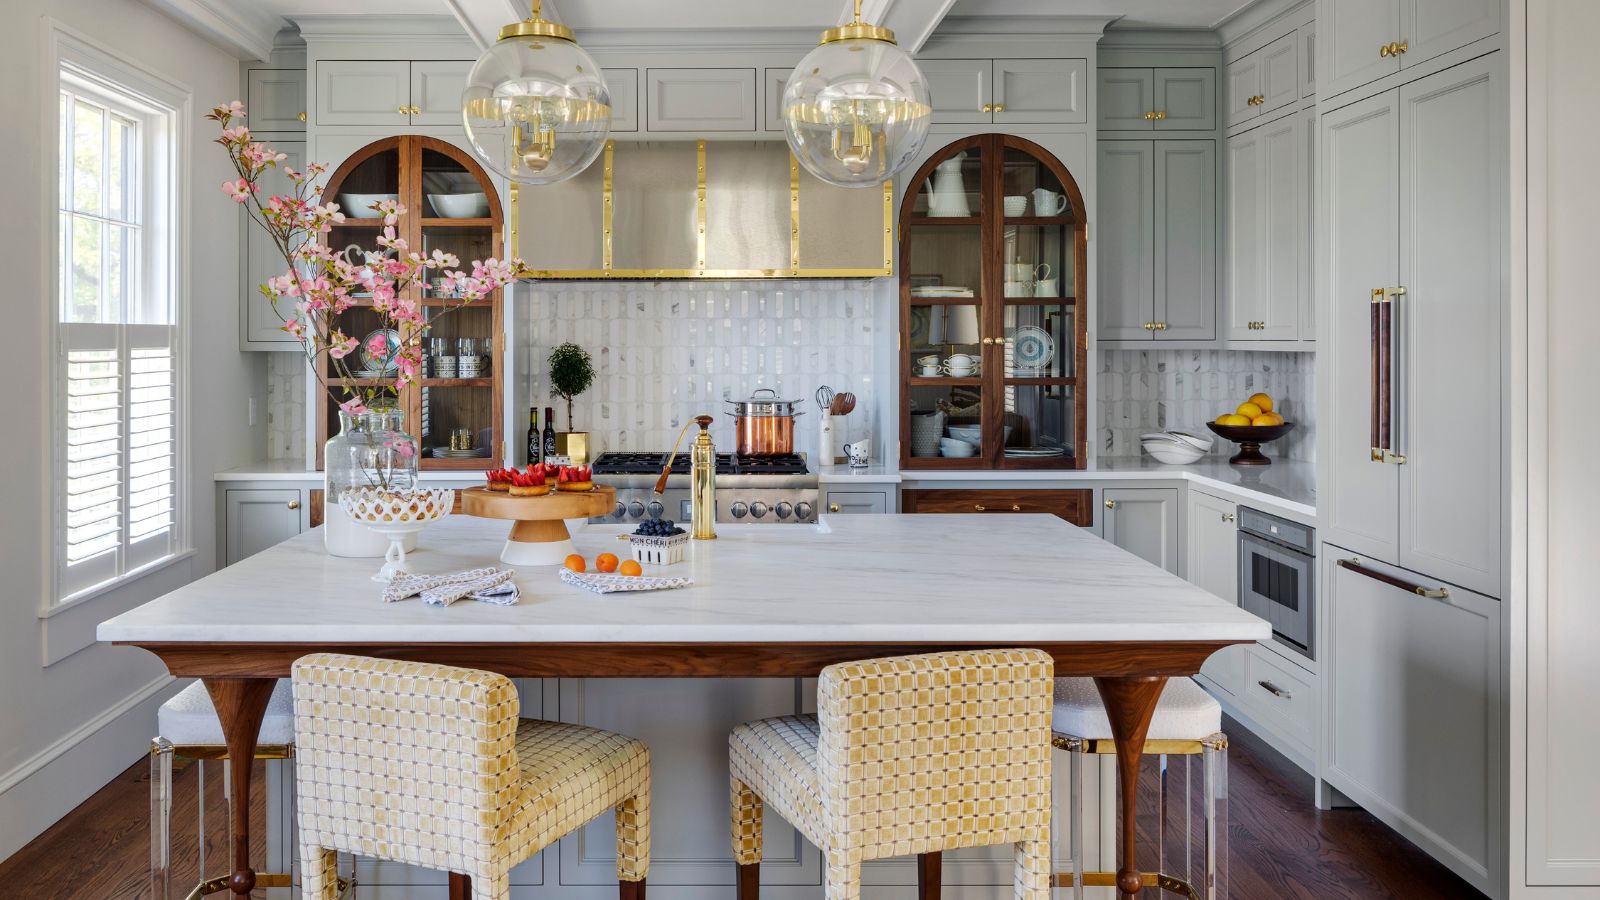 Arched kitchen cabinets are trending – this is why they're the perfect addition to a transitional kitchen, according to designers